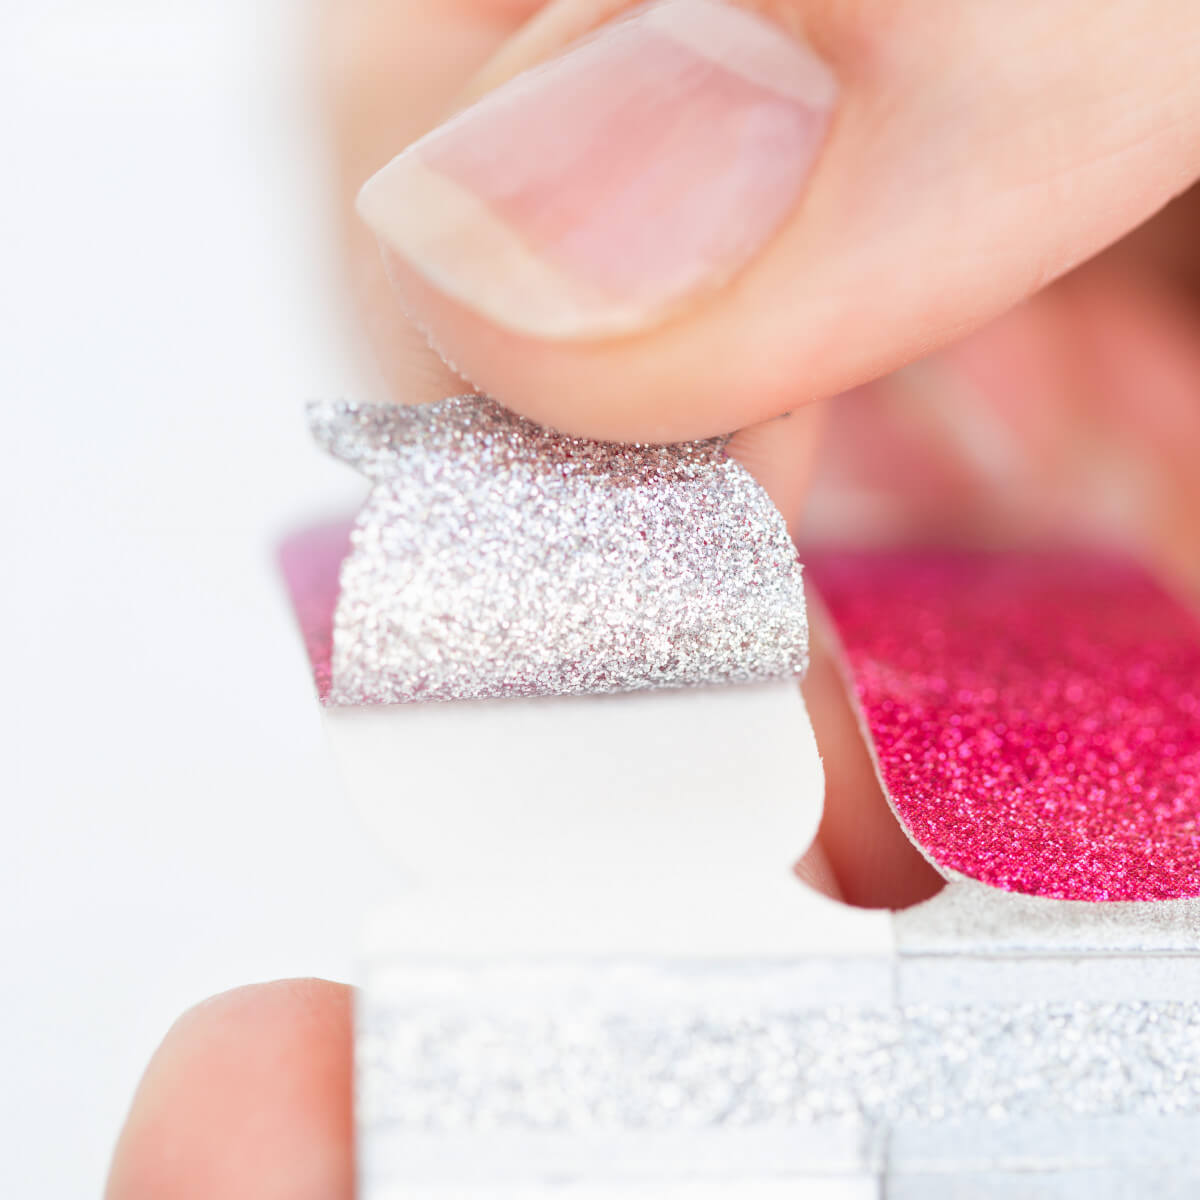 Learn how to apply nail wraps perfectly